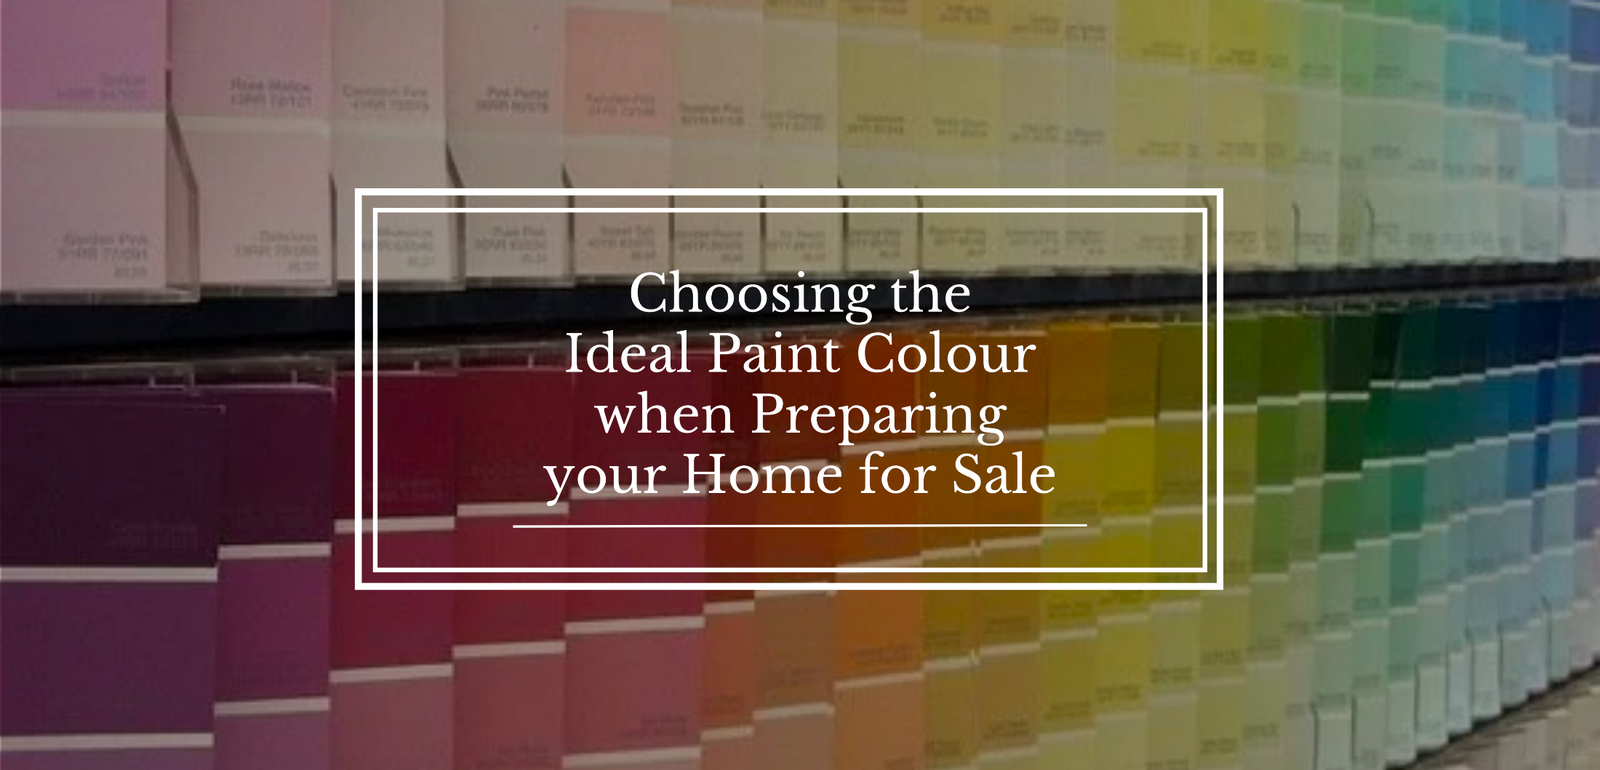 Choosing the Ideal Paint Colour when Preparing your Home for Sale